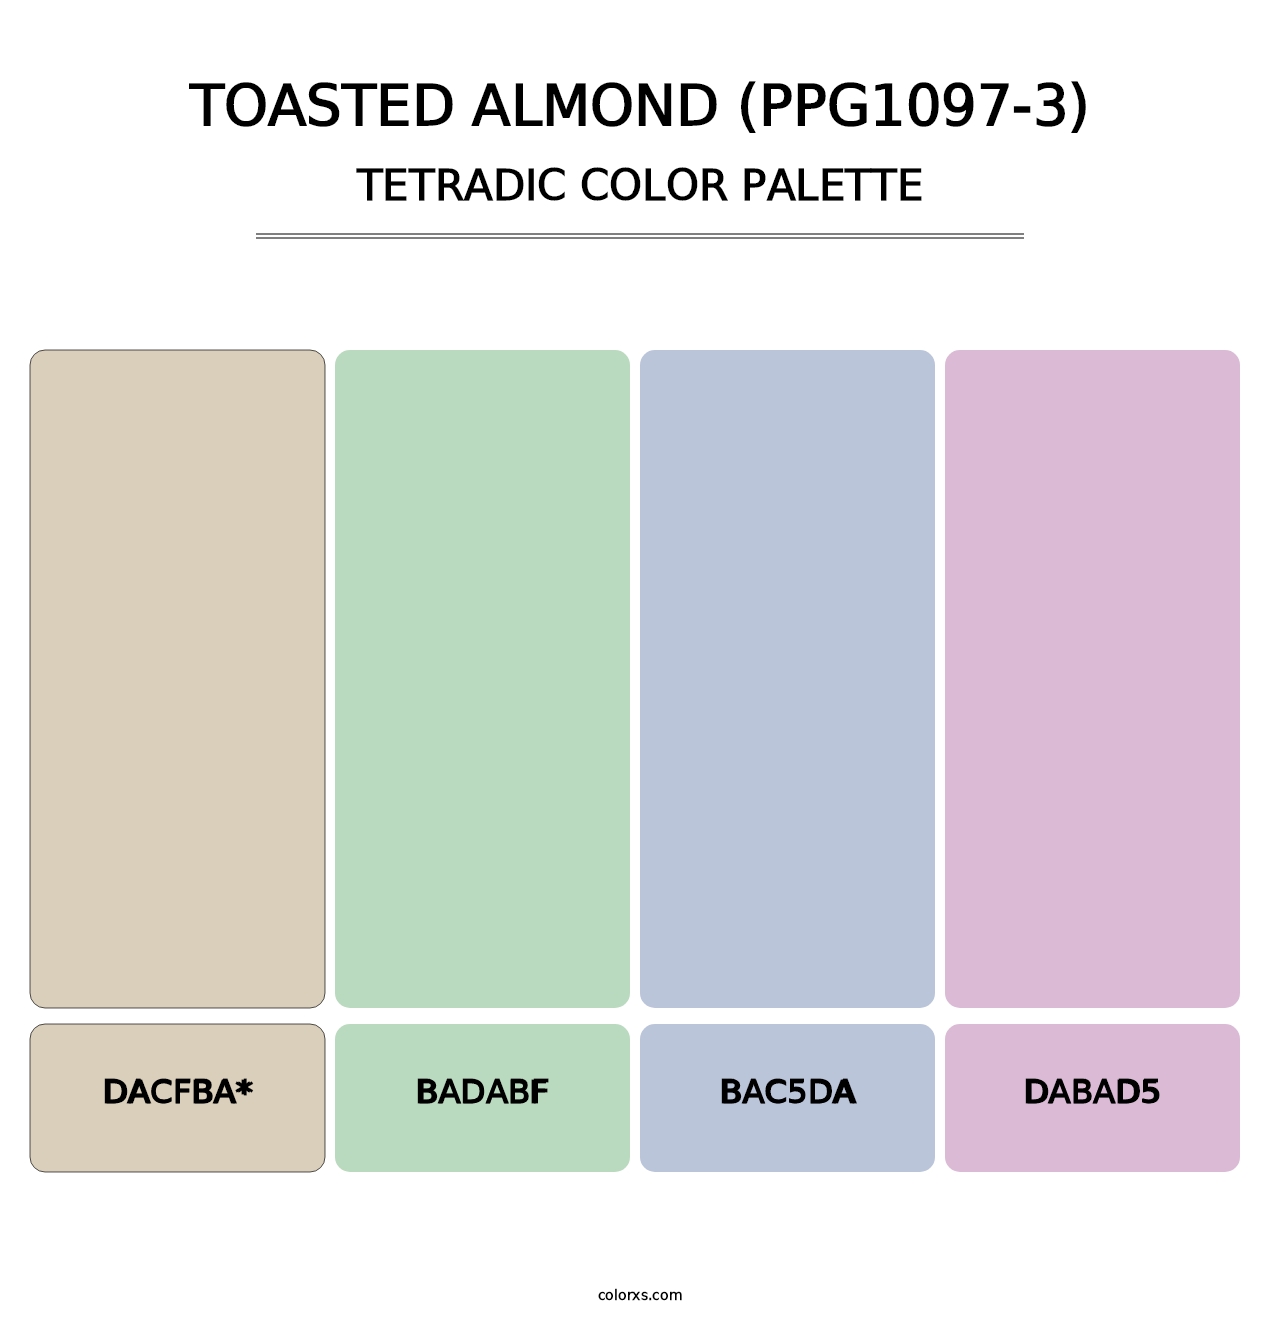 Toasted Almond (PPG1097-3) - Tetradic Color Palette